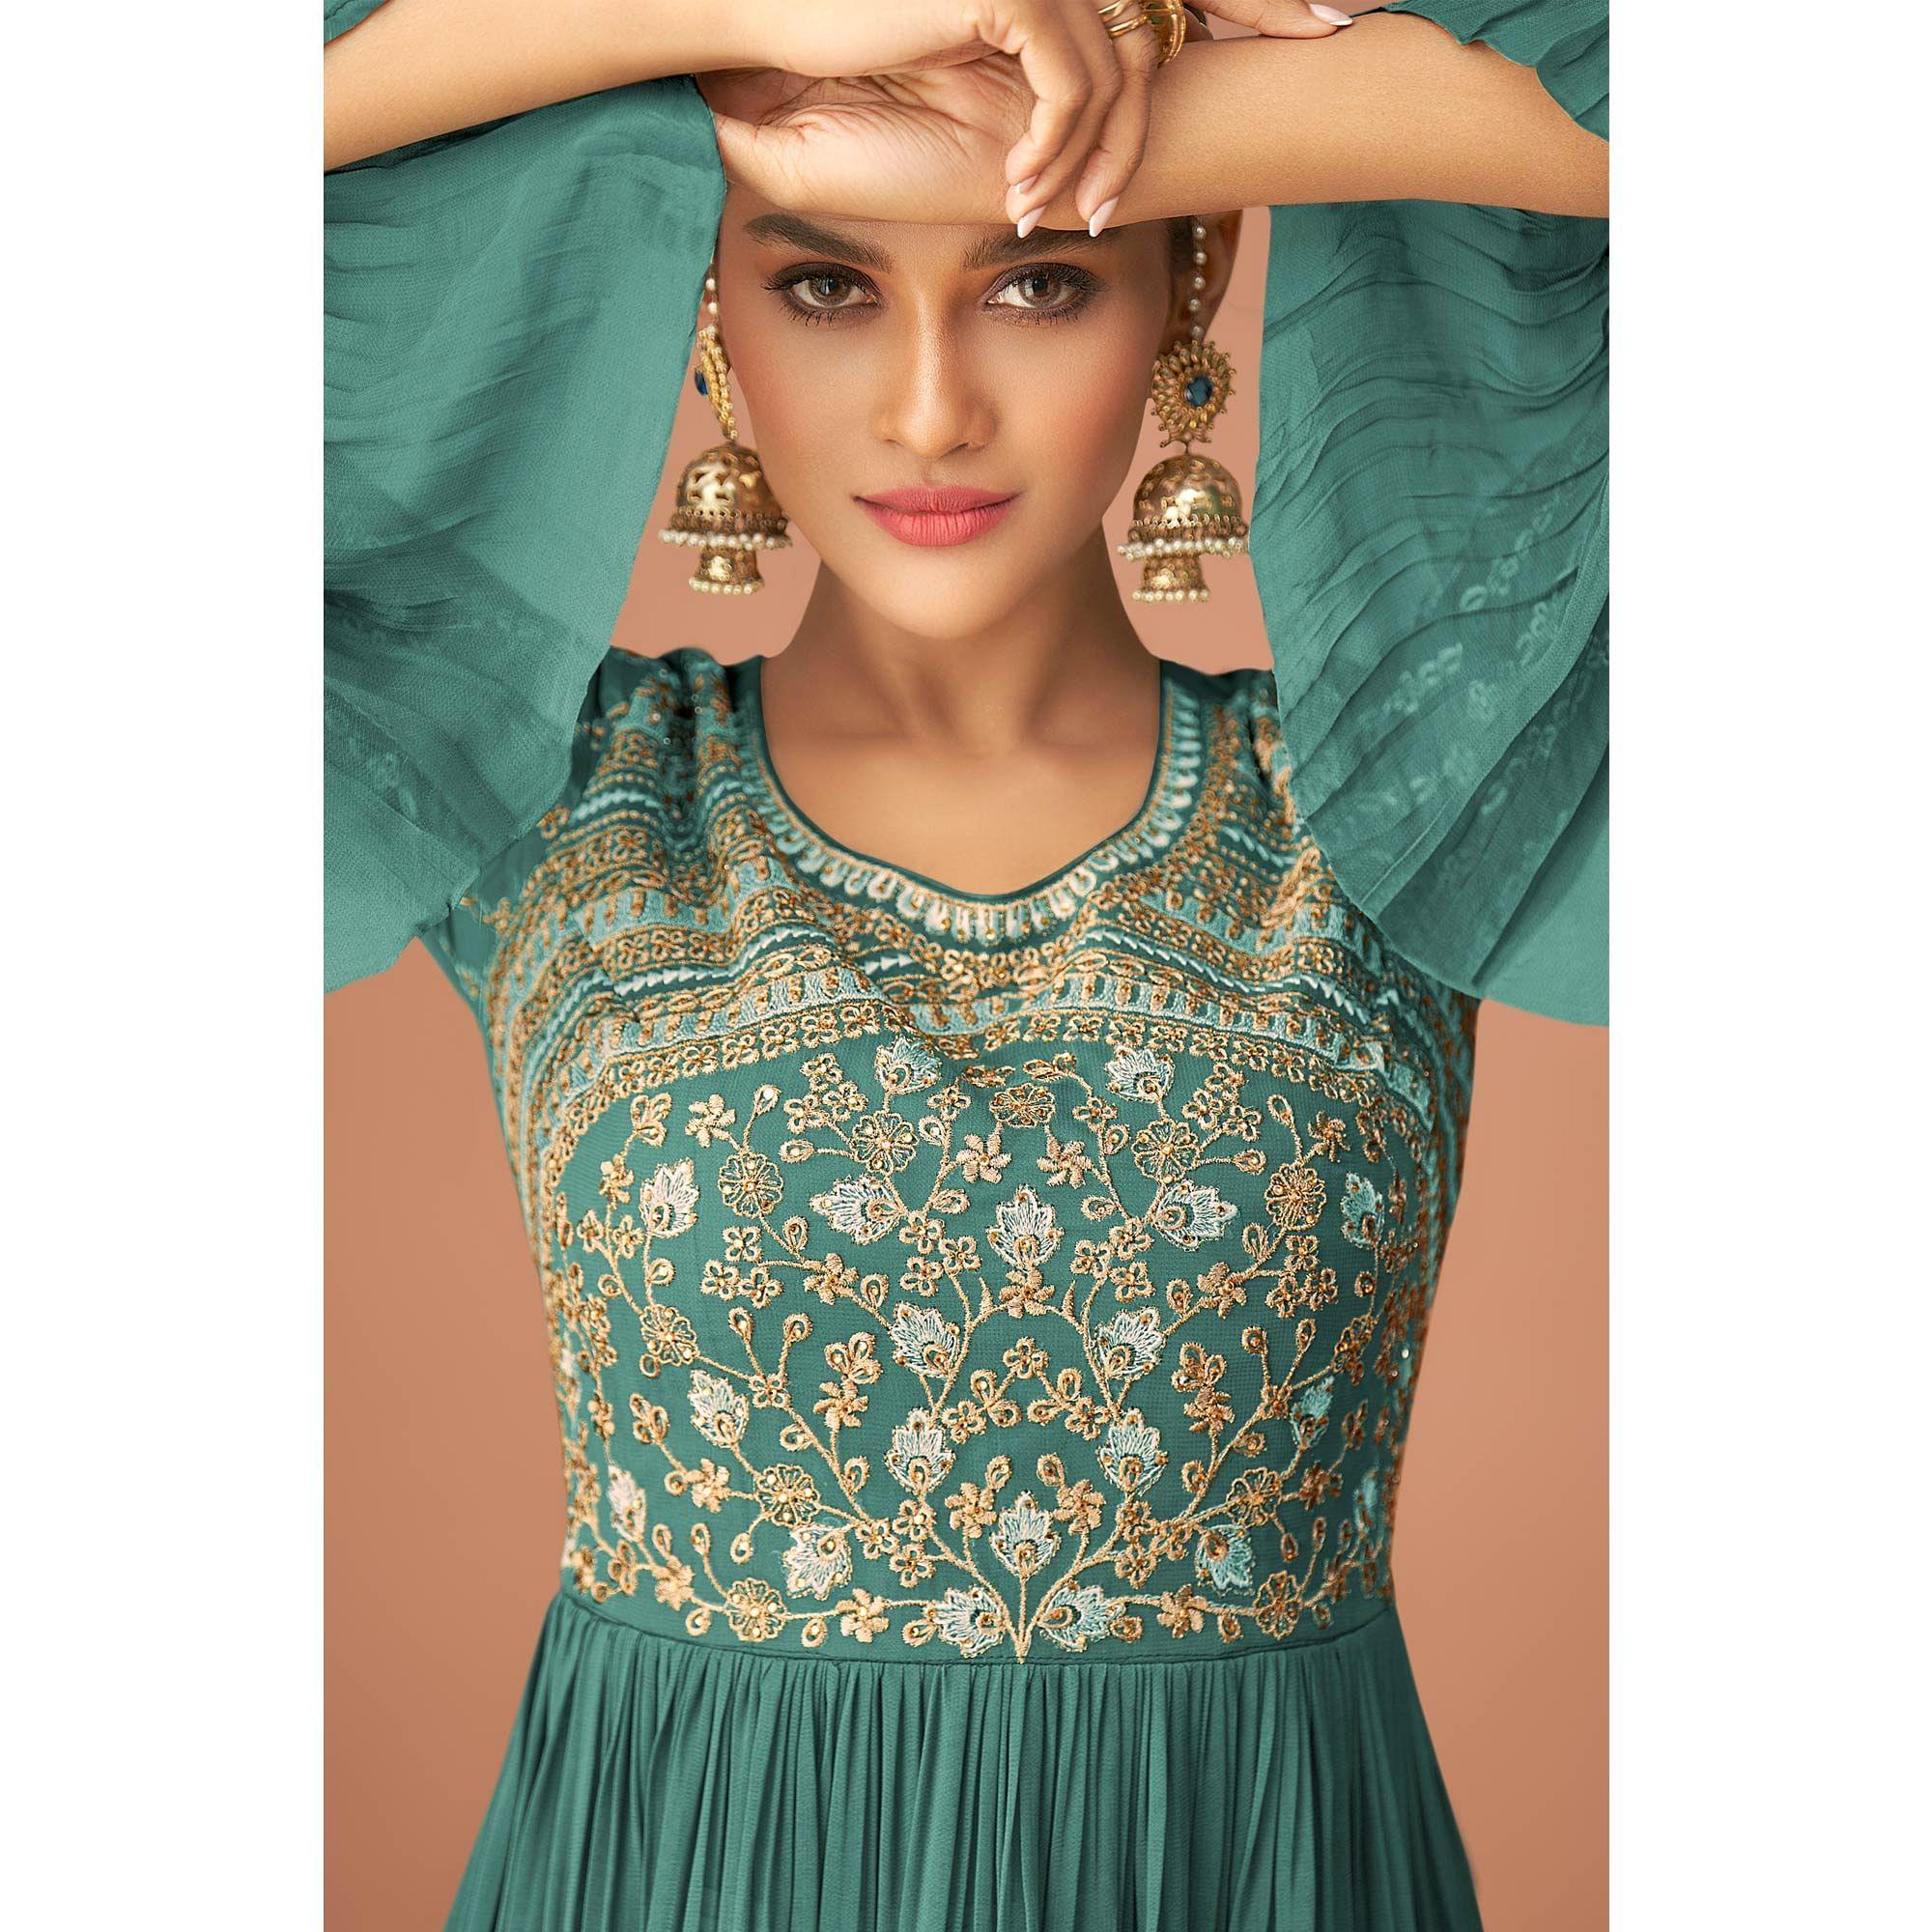 Rama Green Party Wear Embroidered Georgette Sharara Suit - Peachmode